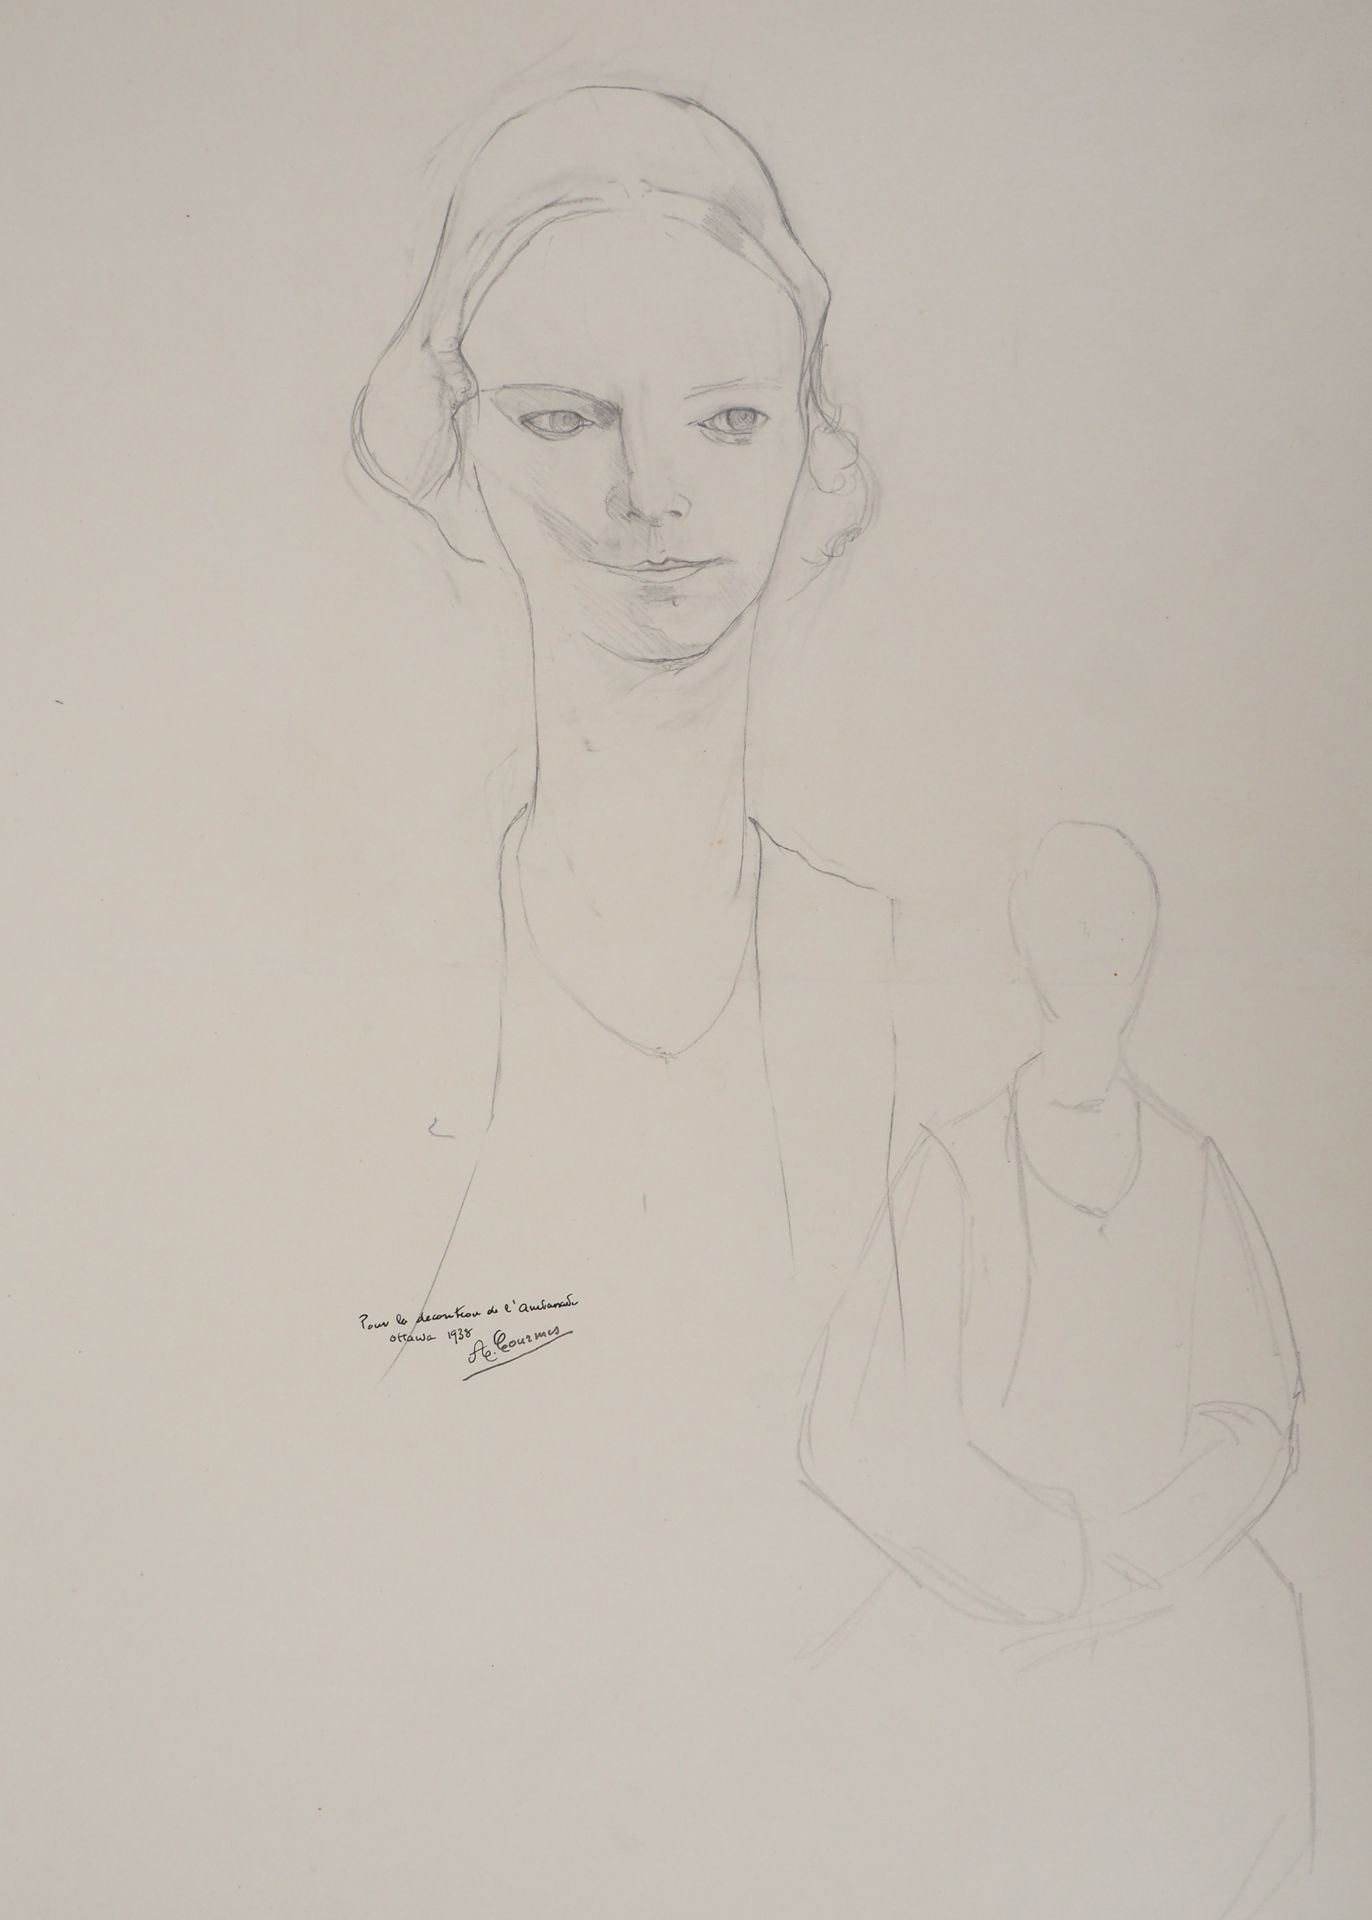 Alfred COURMES Alfred COURMES (1898-1993)

Le regard tendre

Dessin au crayon

S&hellip;